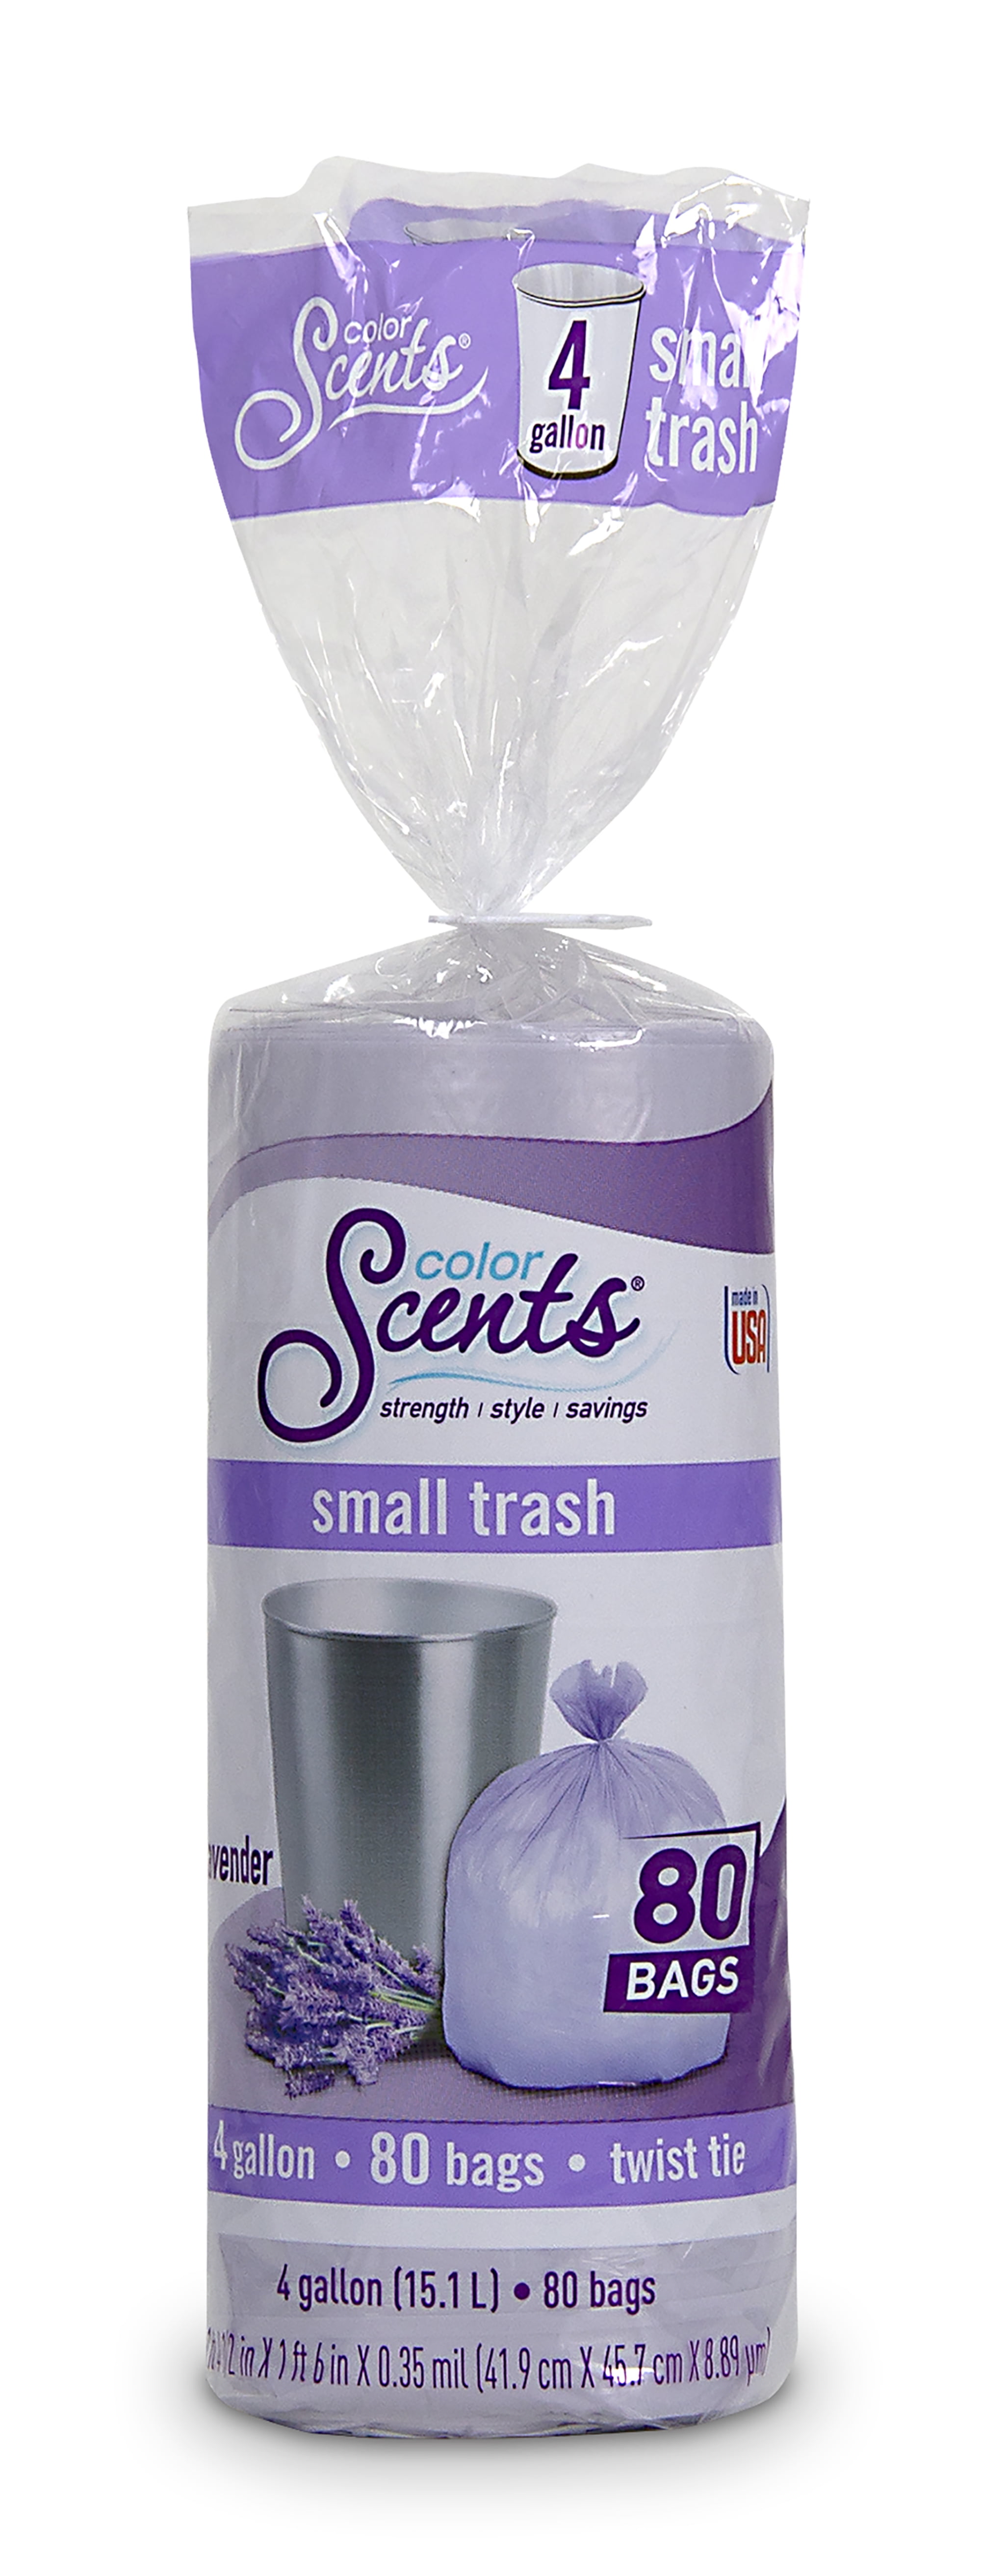 Color Scents Small Trash Bags - 4 Gallon, 80 Bags (1 Pack of 80 Count),  Twist Tie - Lavender Bag with Lavender Scent (1 Pack of 80)